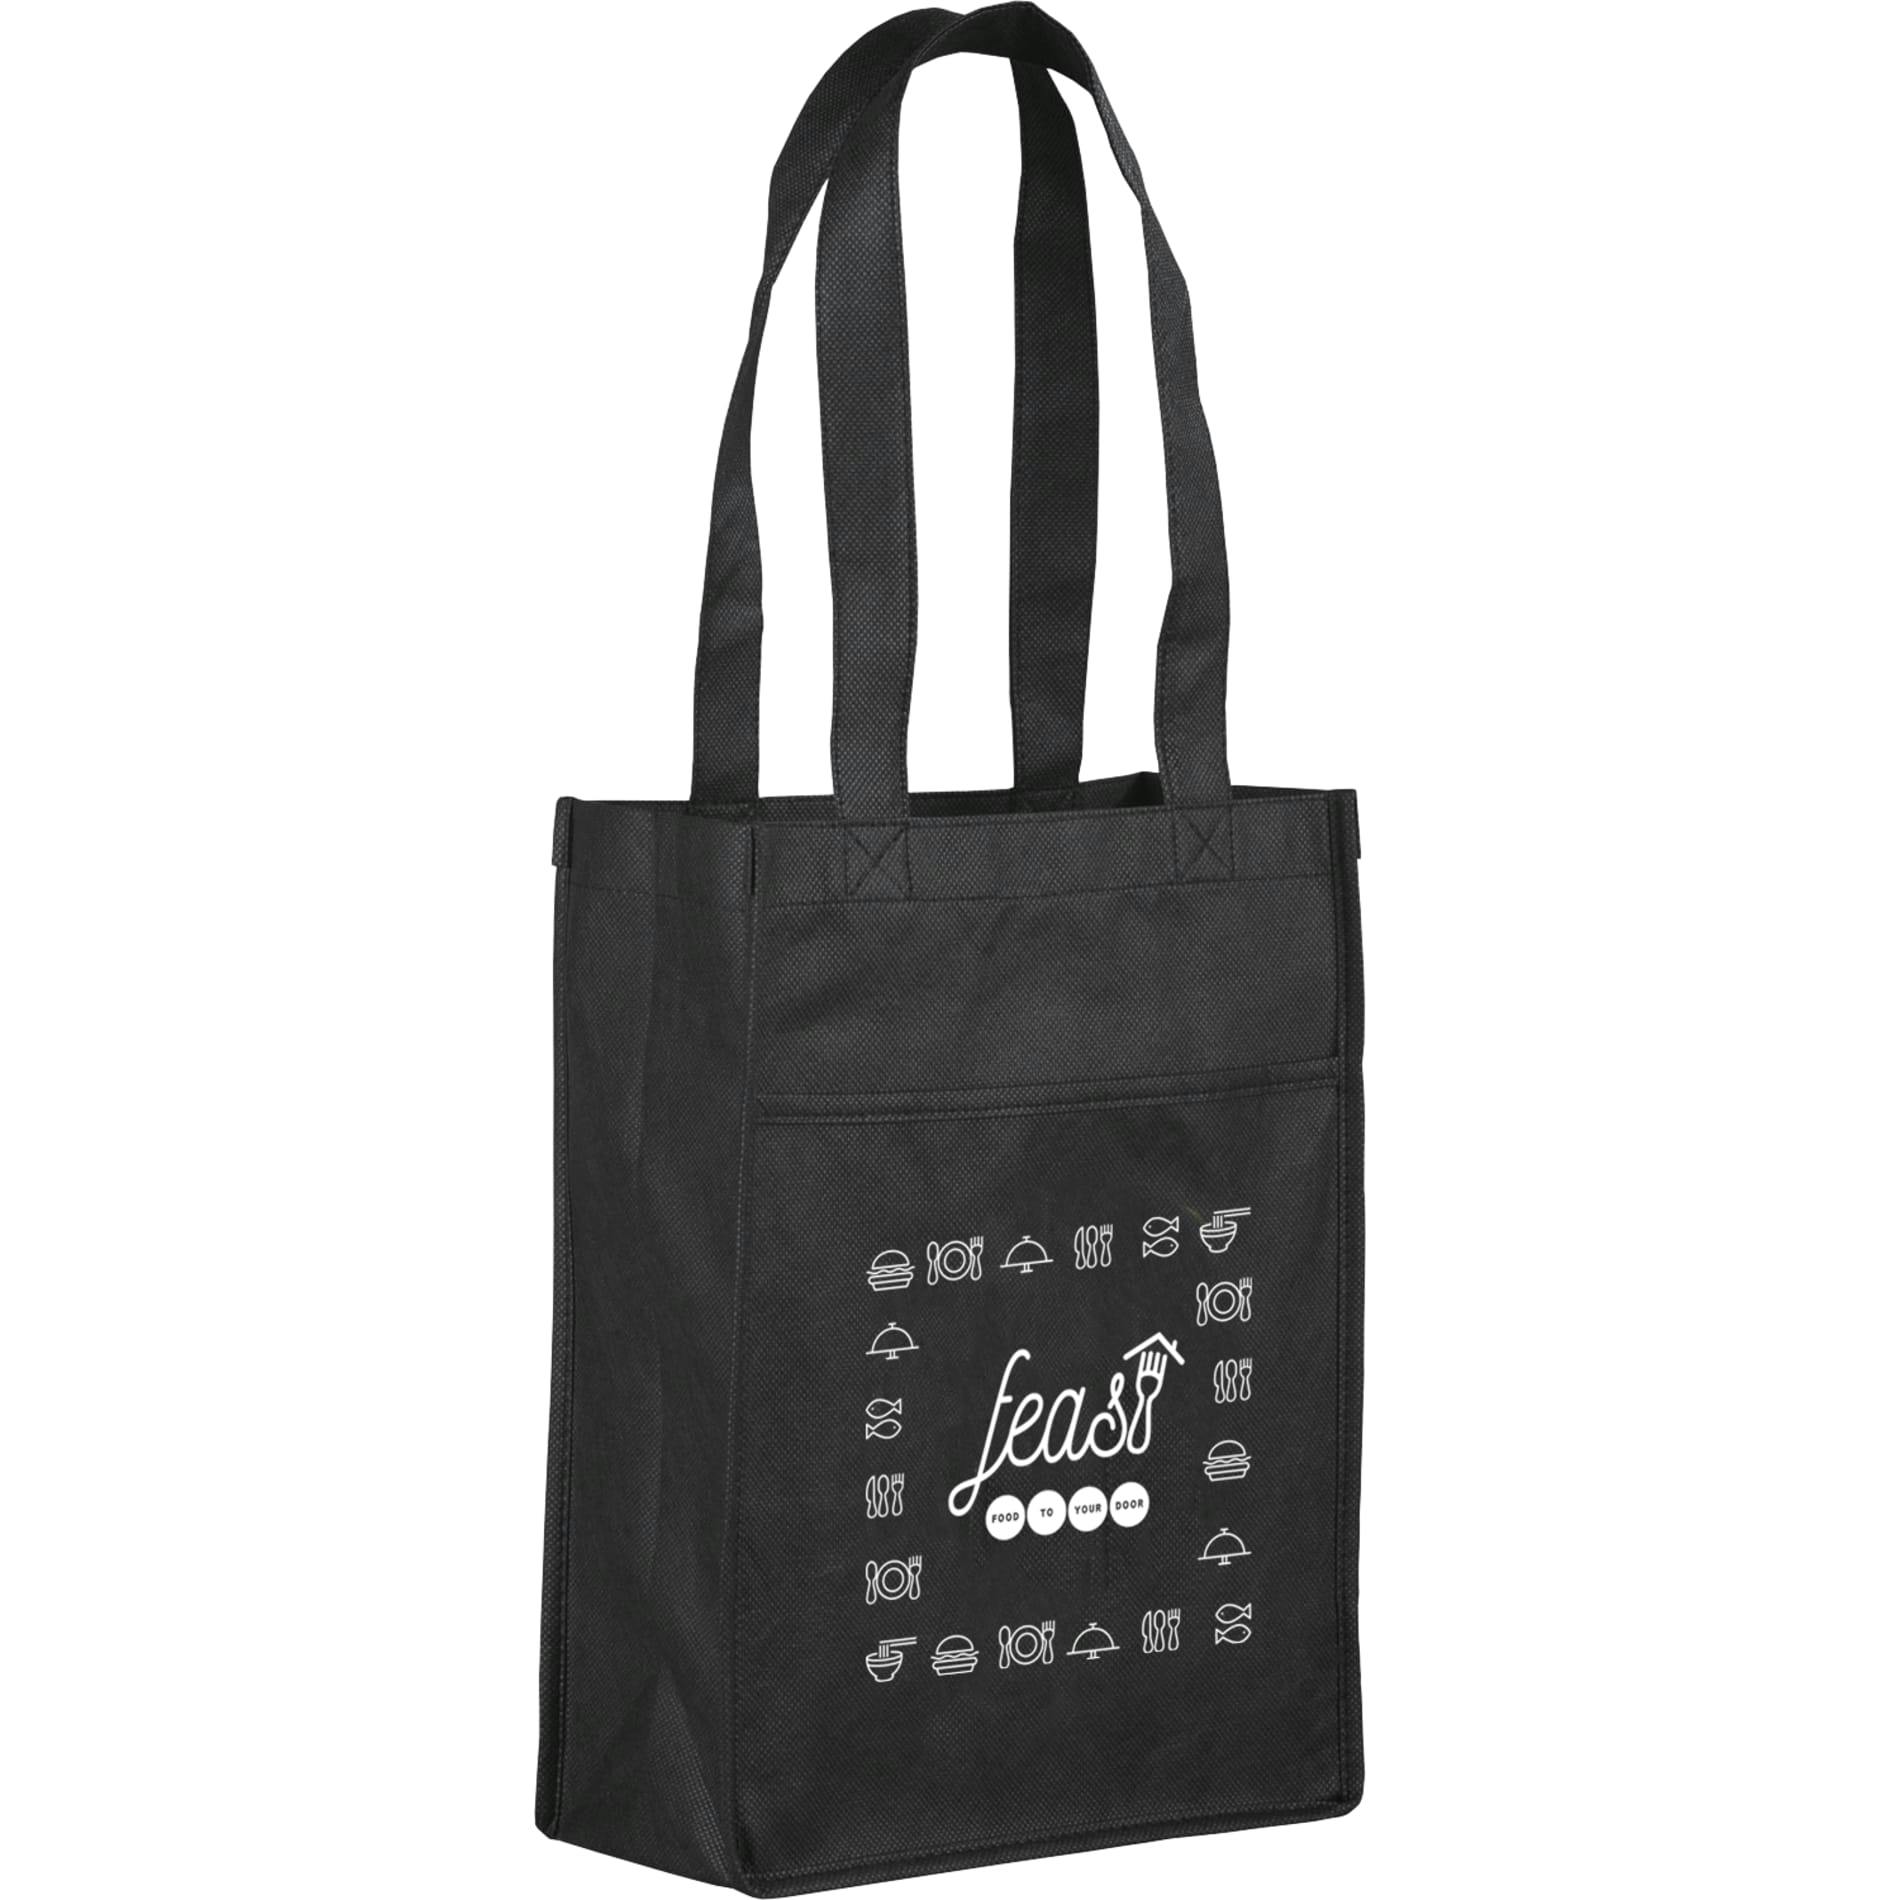 Non-Woven Gift Tote with Pocket - additional Image 2